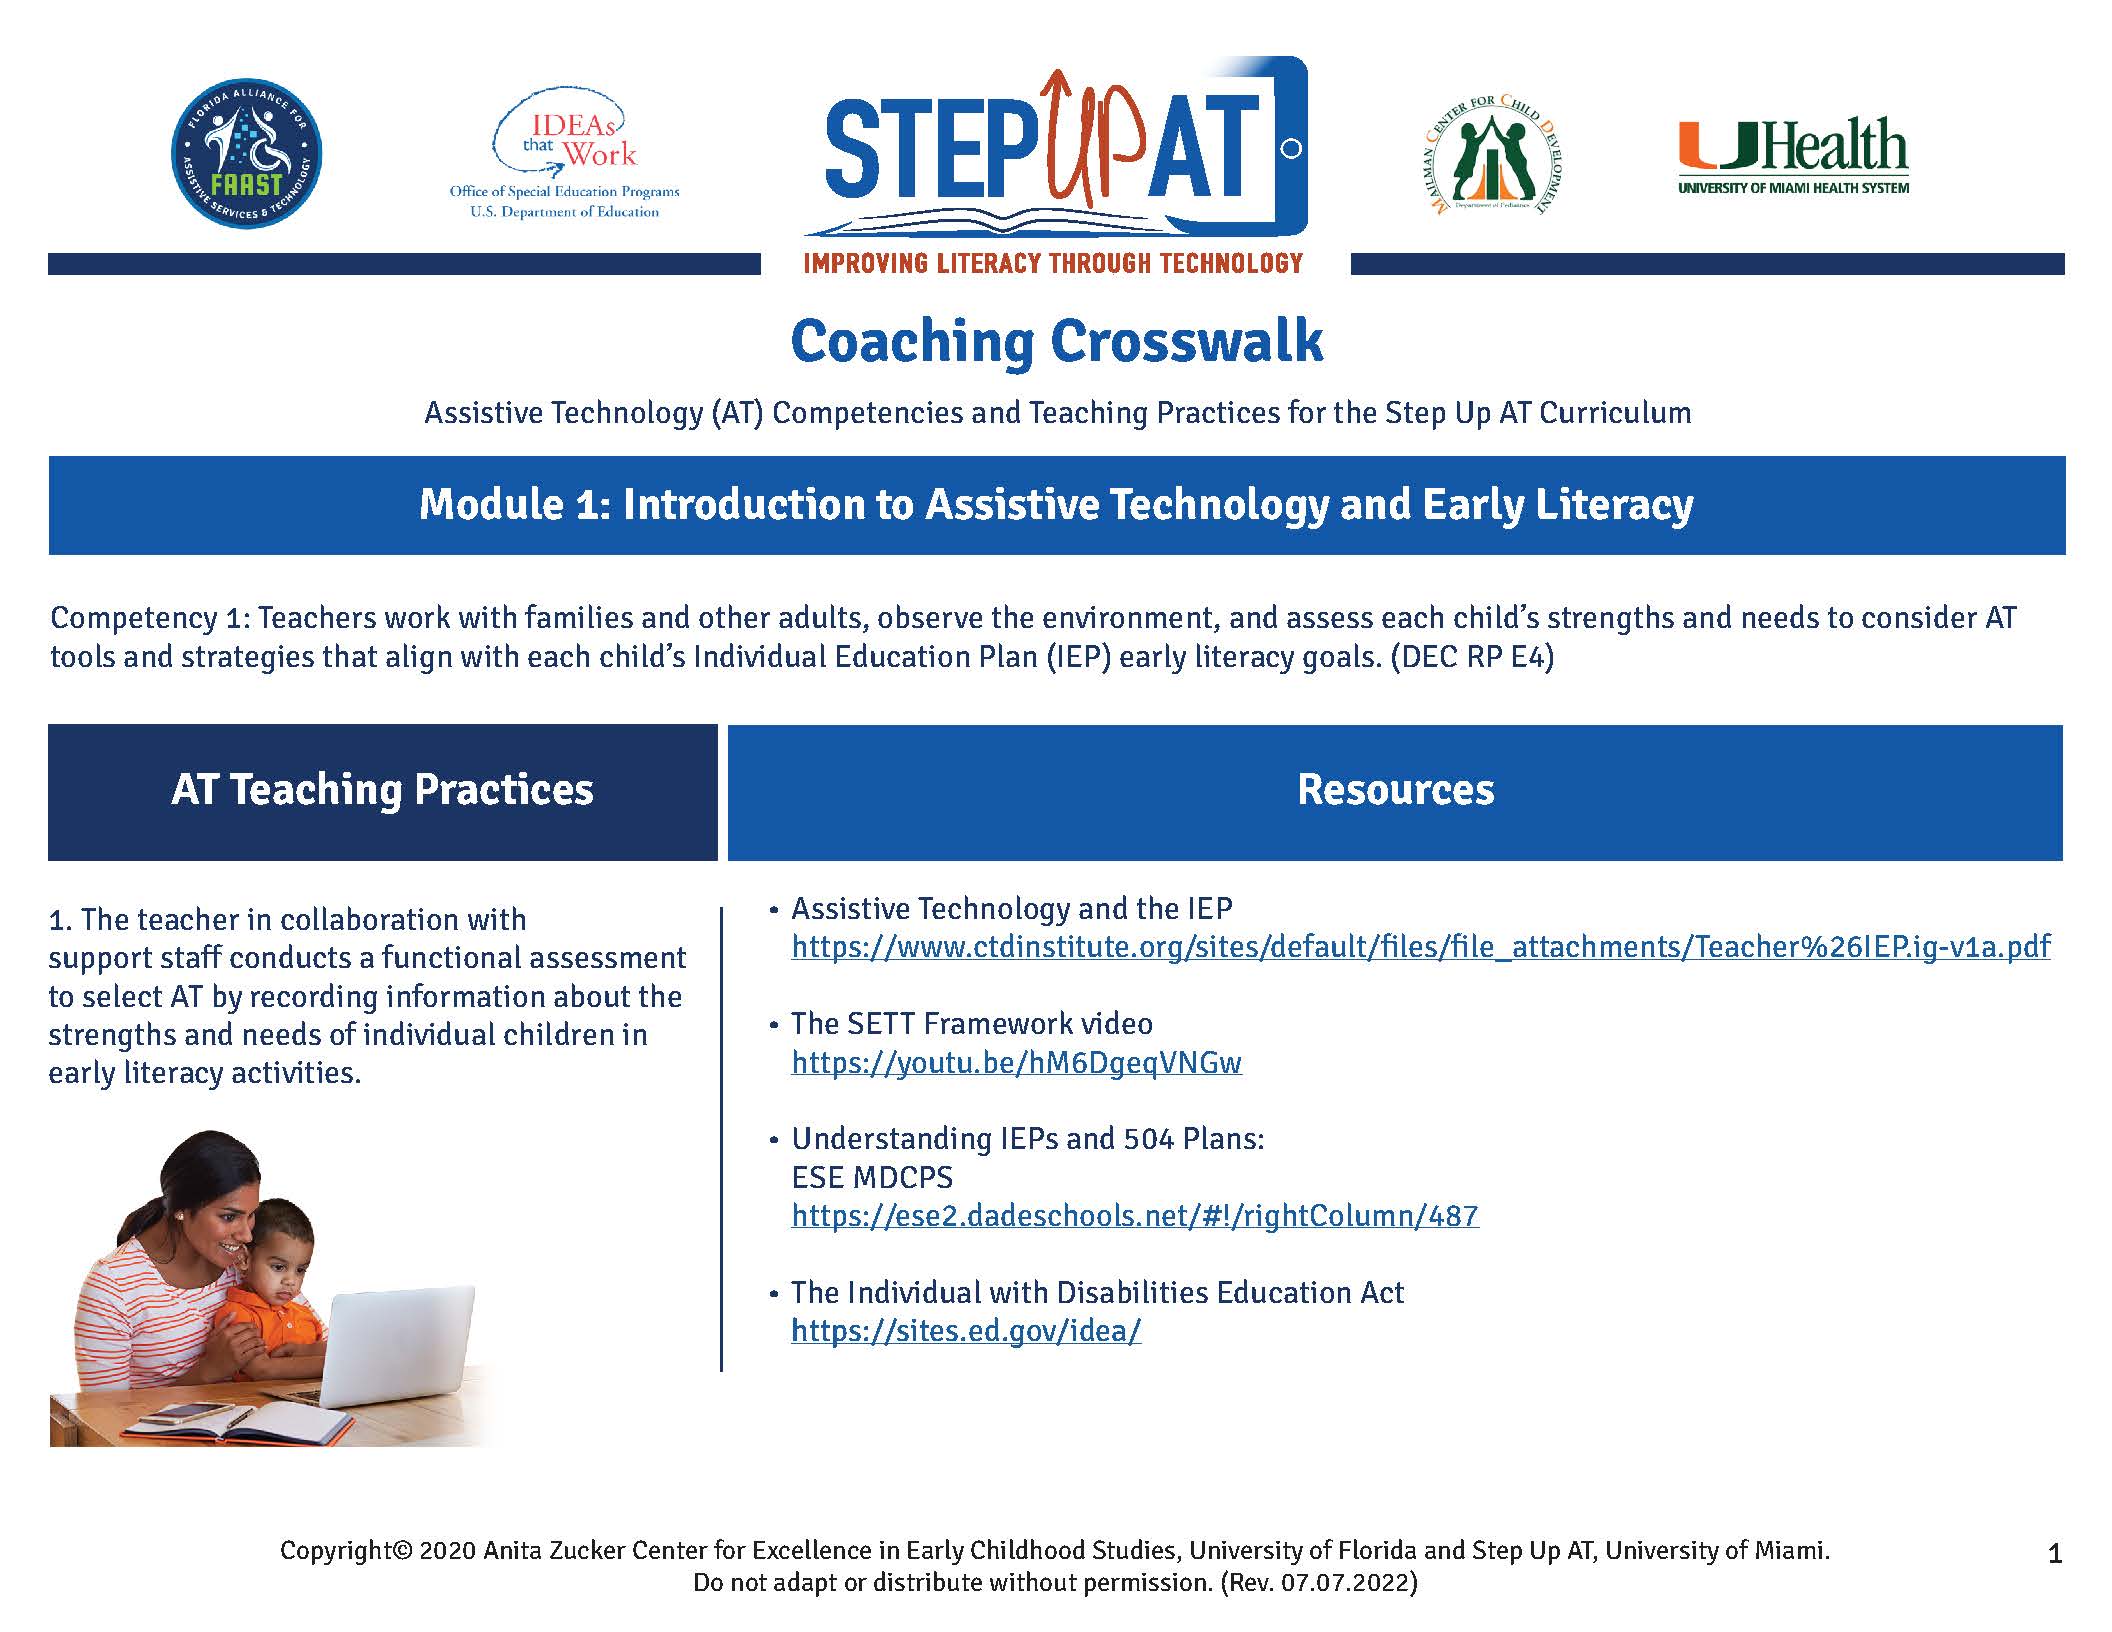 Step Up AT Coaching Crosswalk Guide (1st page)